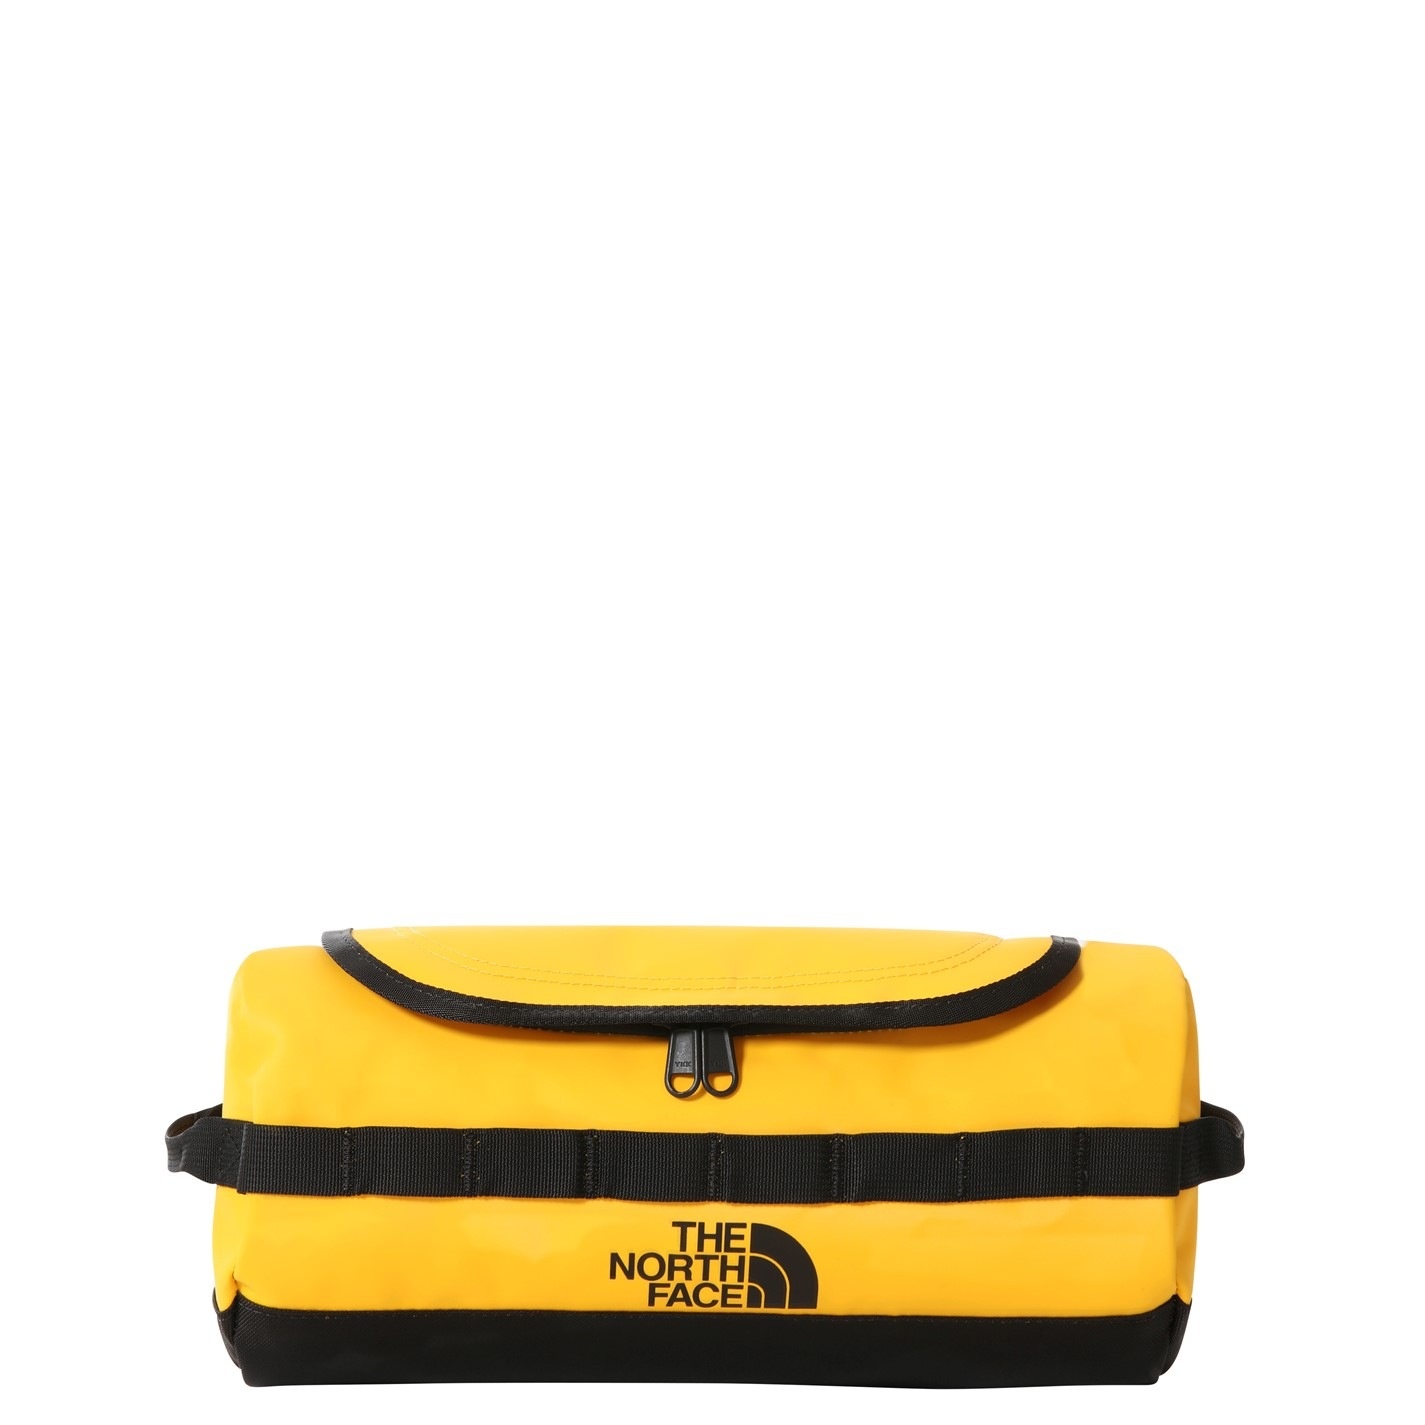 TNF BASE CAMP TRAVEL CANISTER - 1